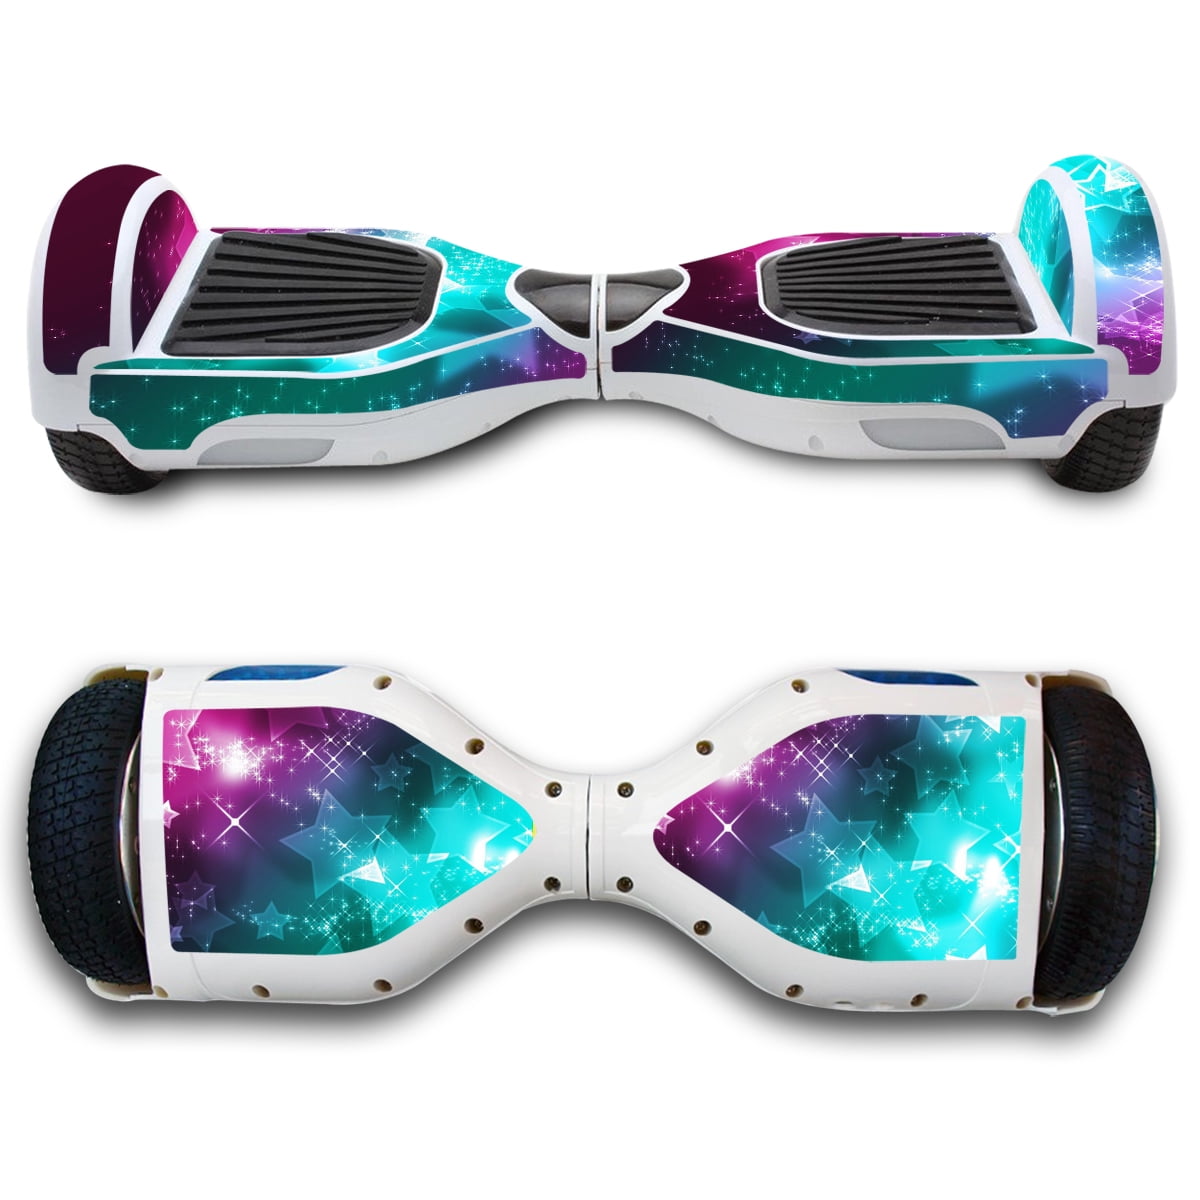 Skin Decal Wrap pour Hover Board Self Balancing Scooter swagway X1 Autocollant Mad HT 